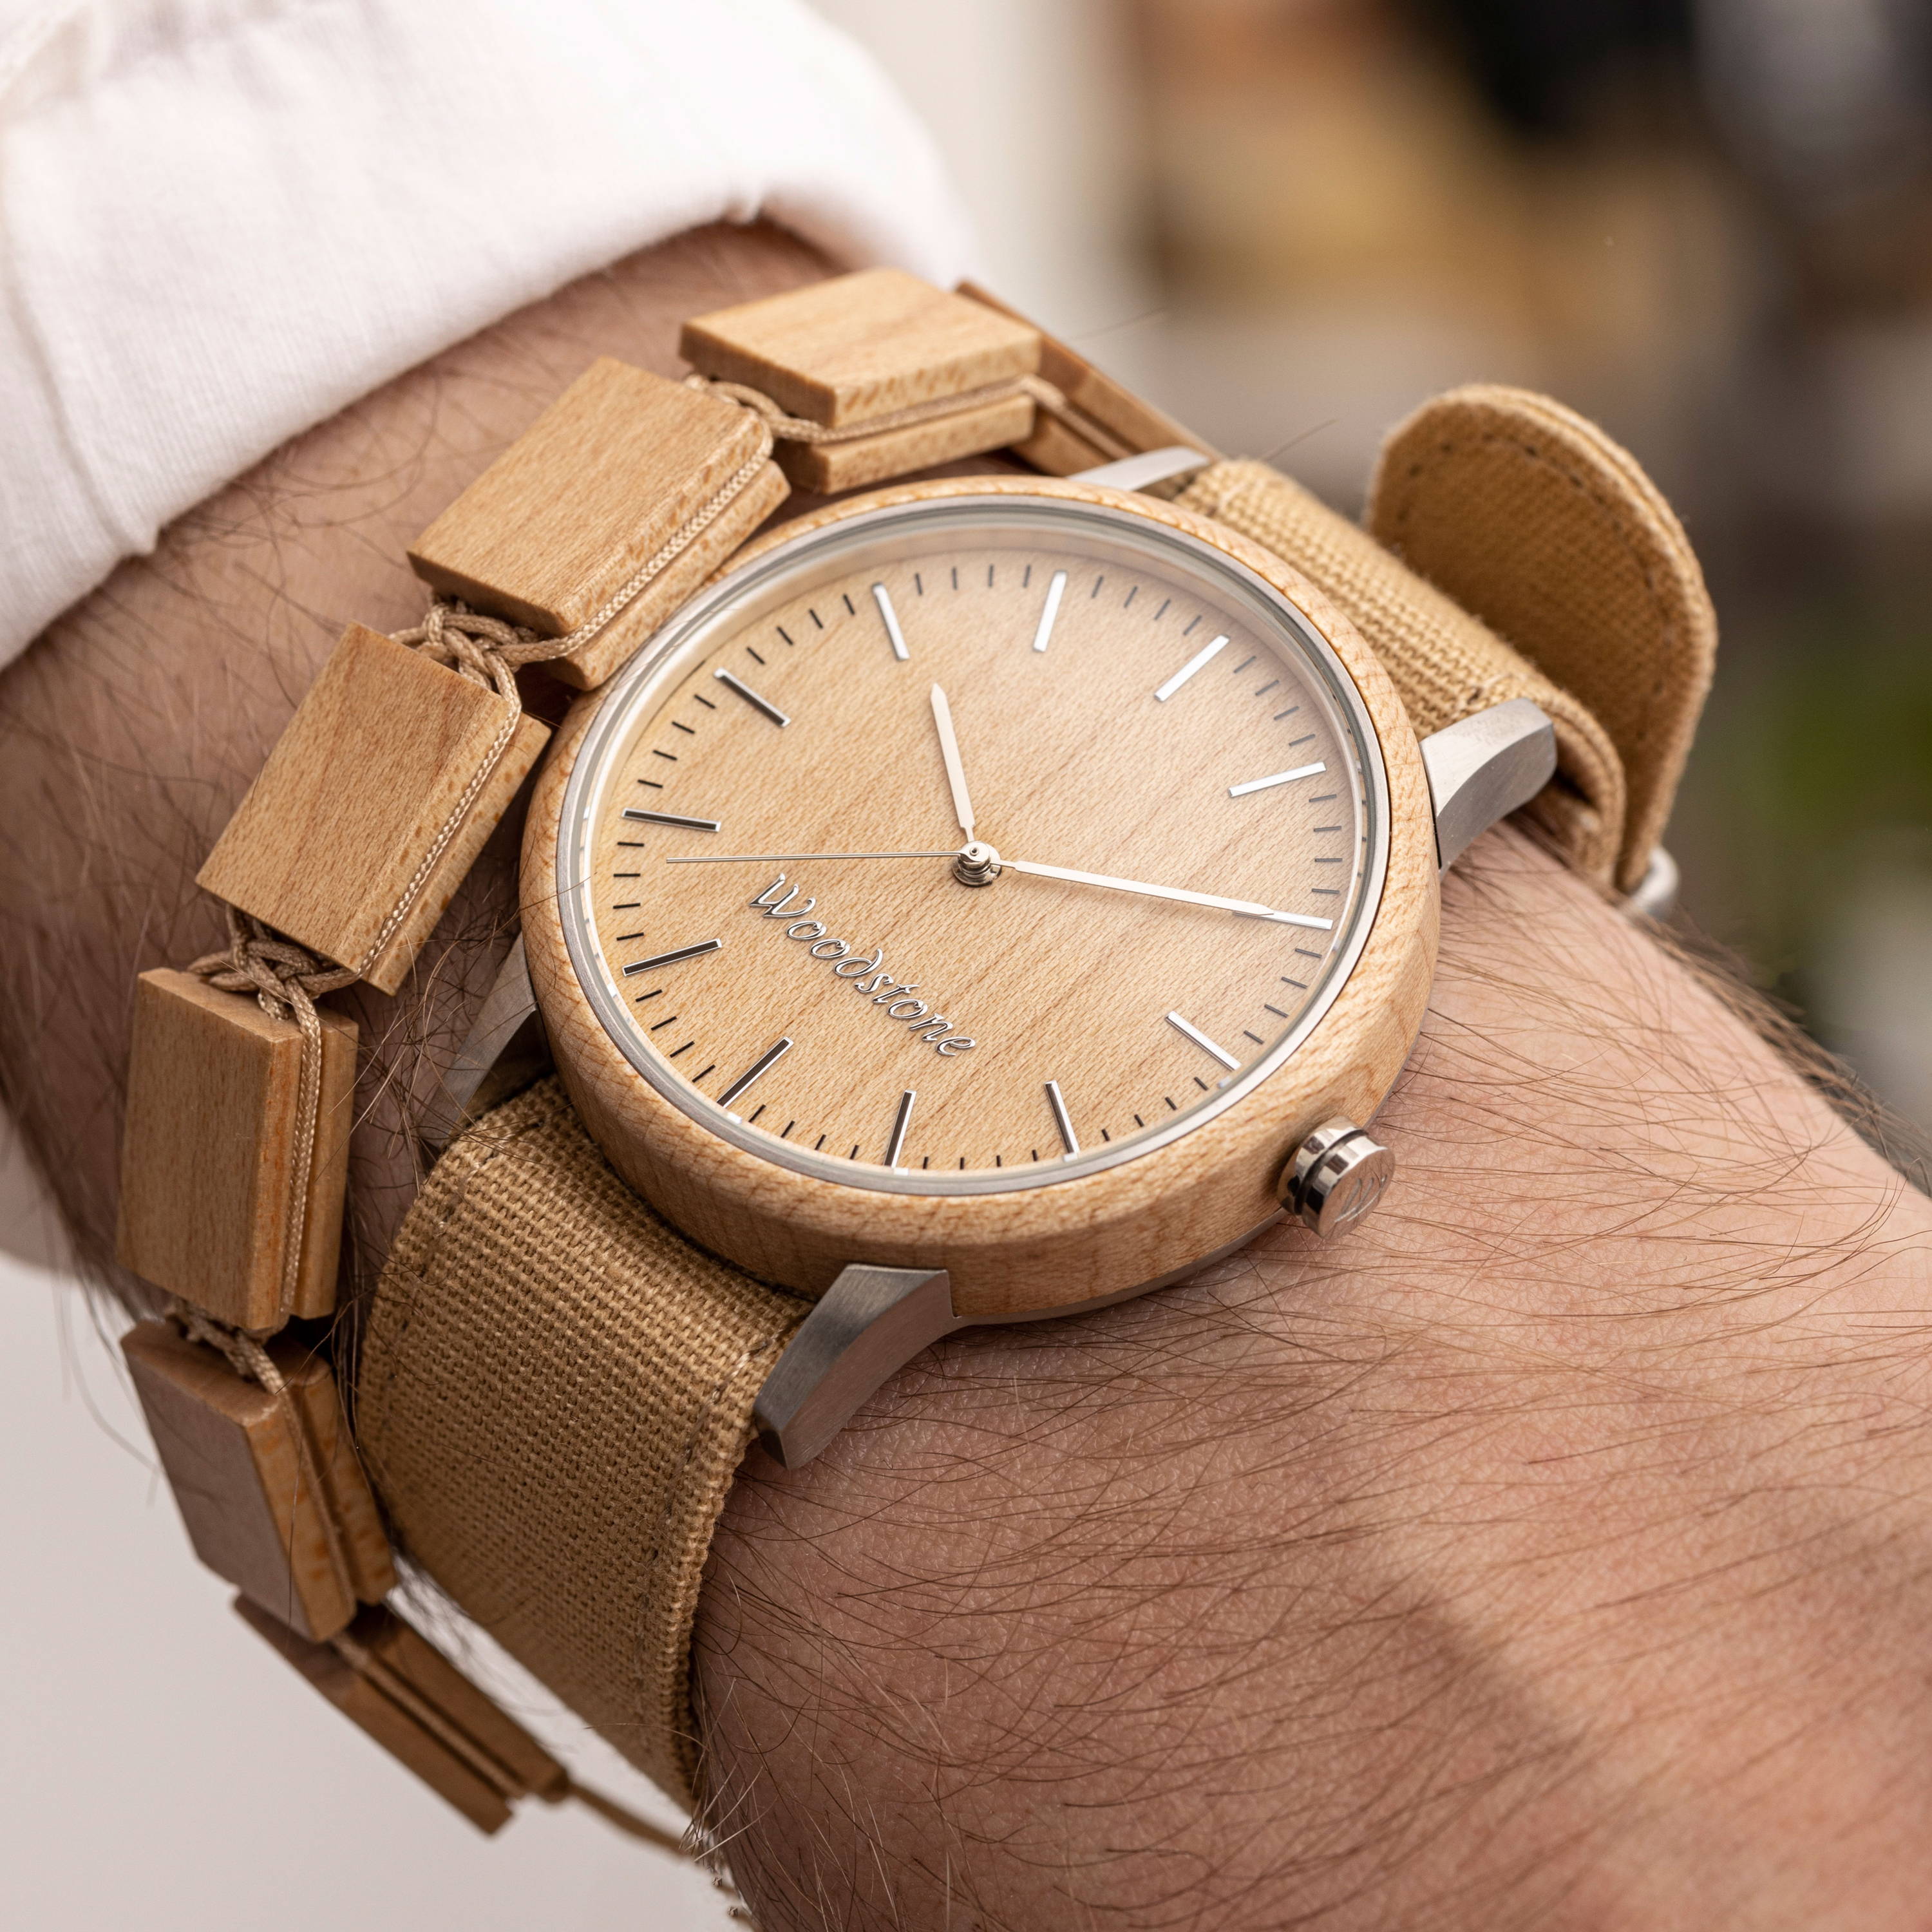 Woodstone wooden watches perfect anniversary gifts for man maple wood